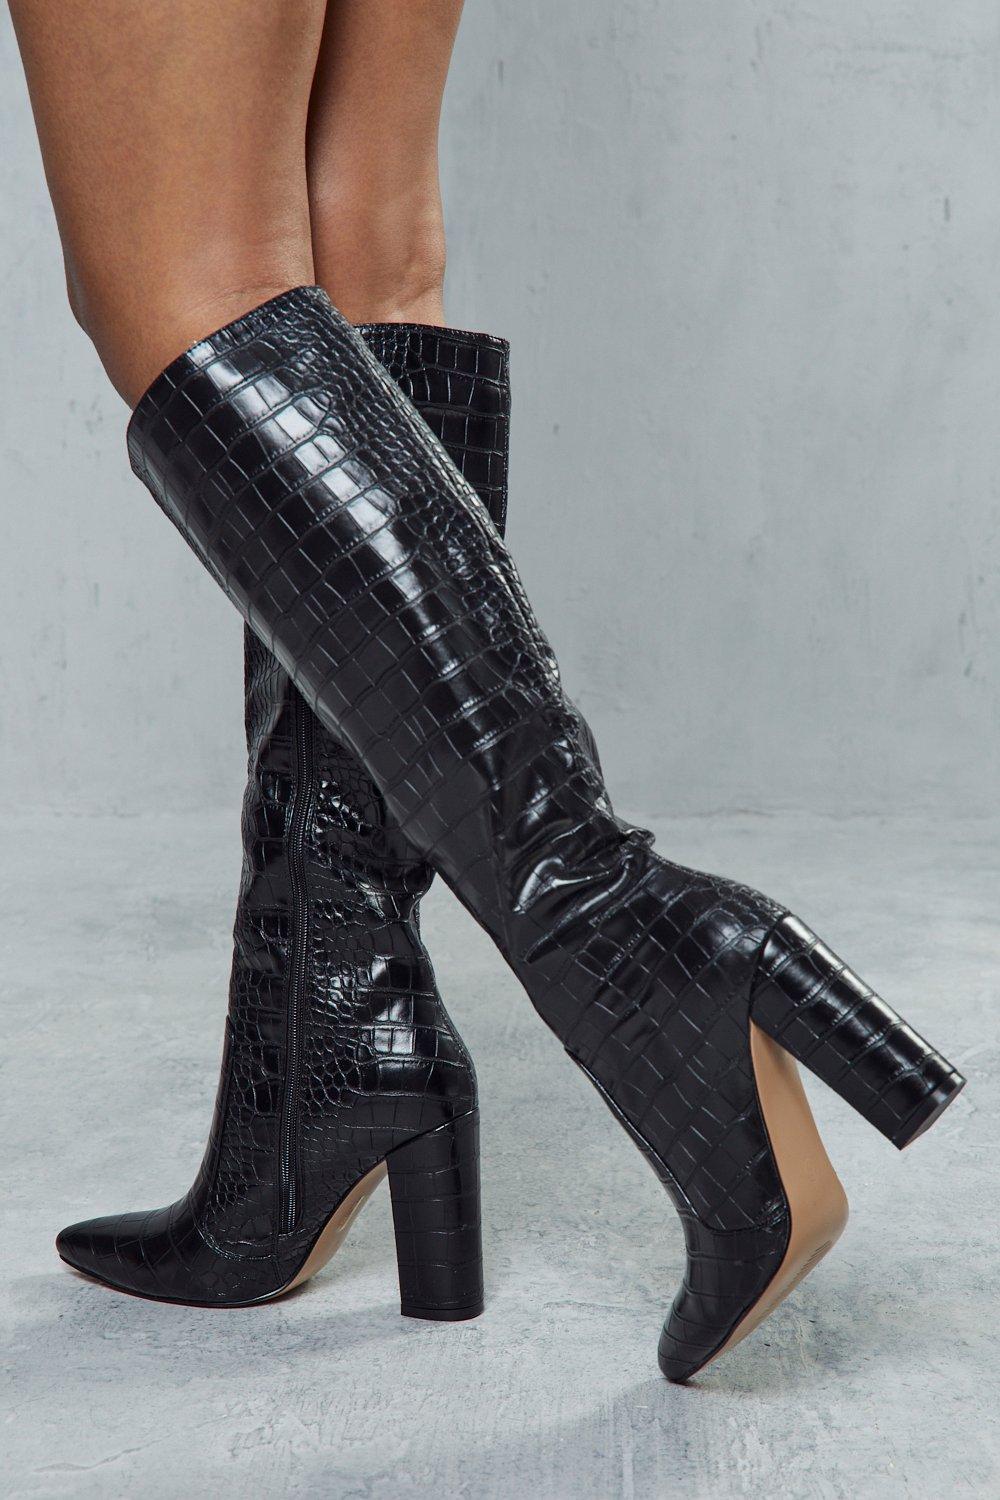 Knee-High Boots Have Landed